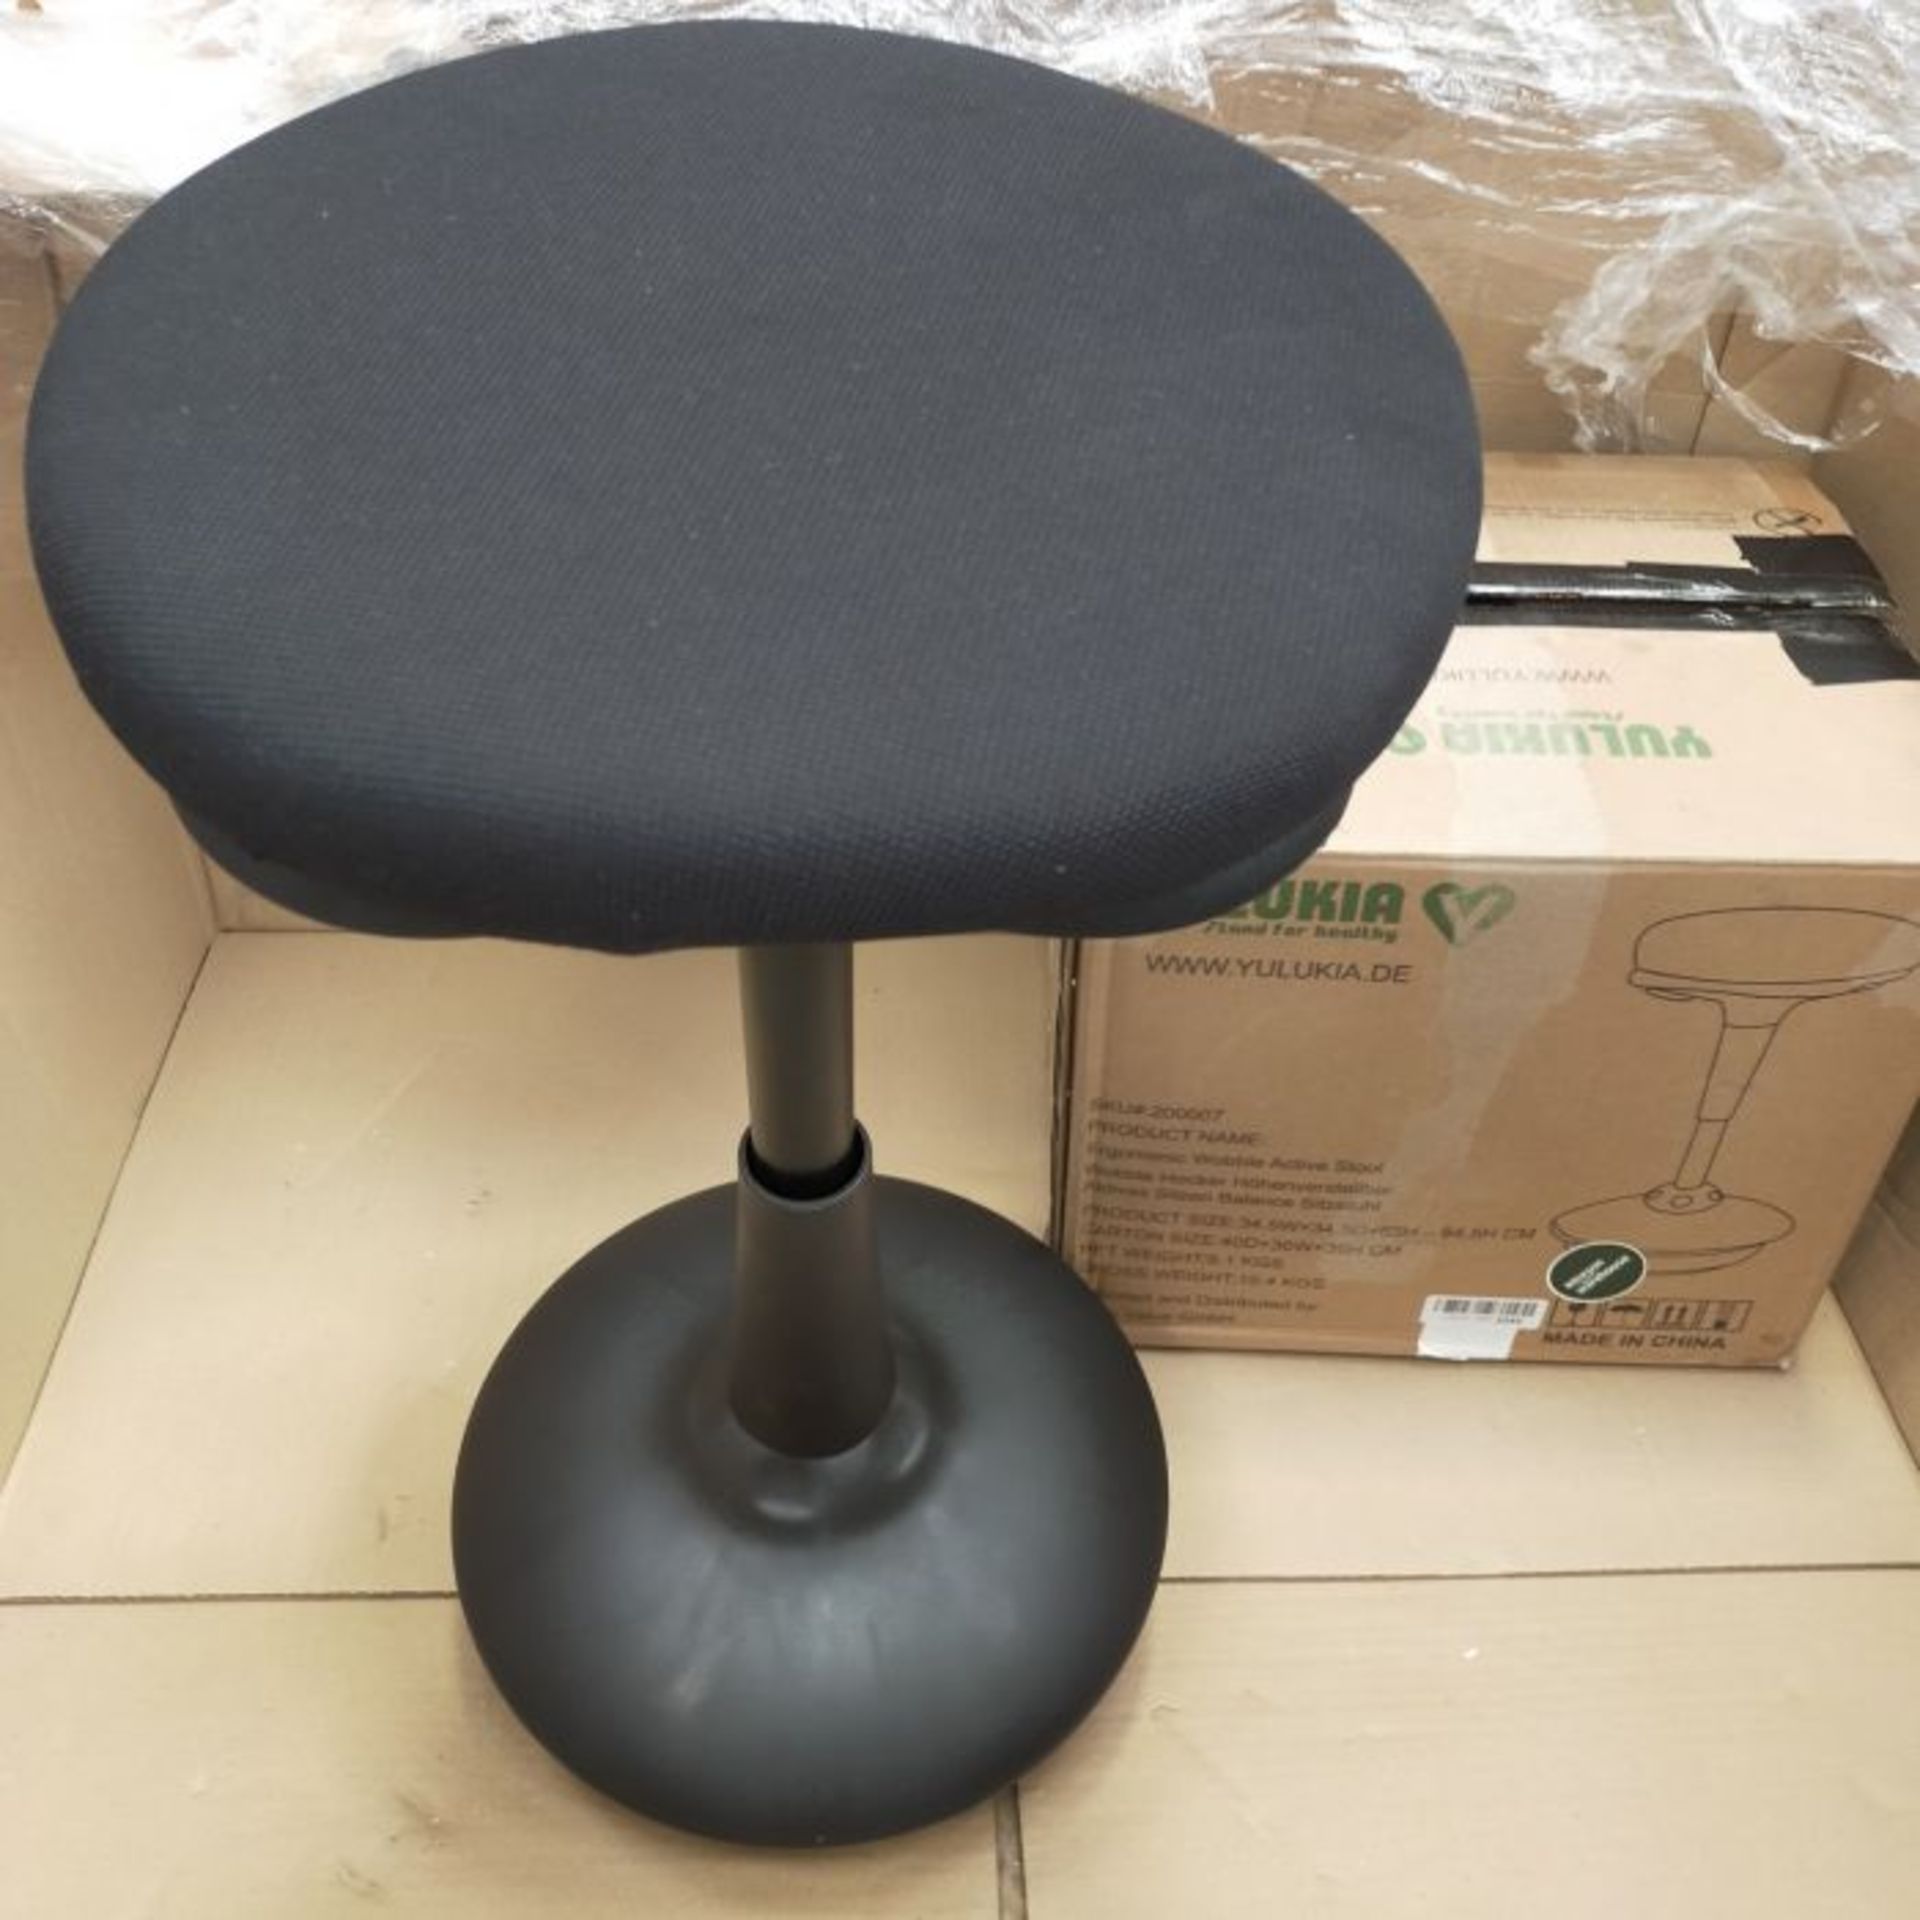 RRP £90.00 YULUKIA 200007 Wobble Stool Height Adjustable Active Sitting Balance Chair for Office - Image 2 of 3